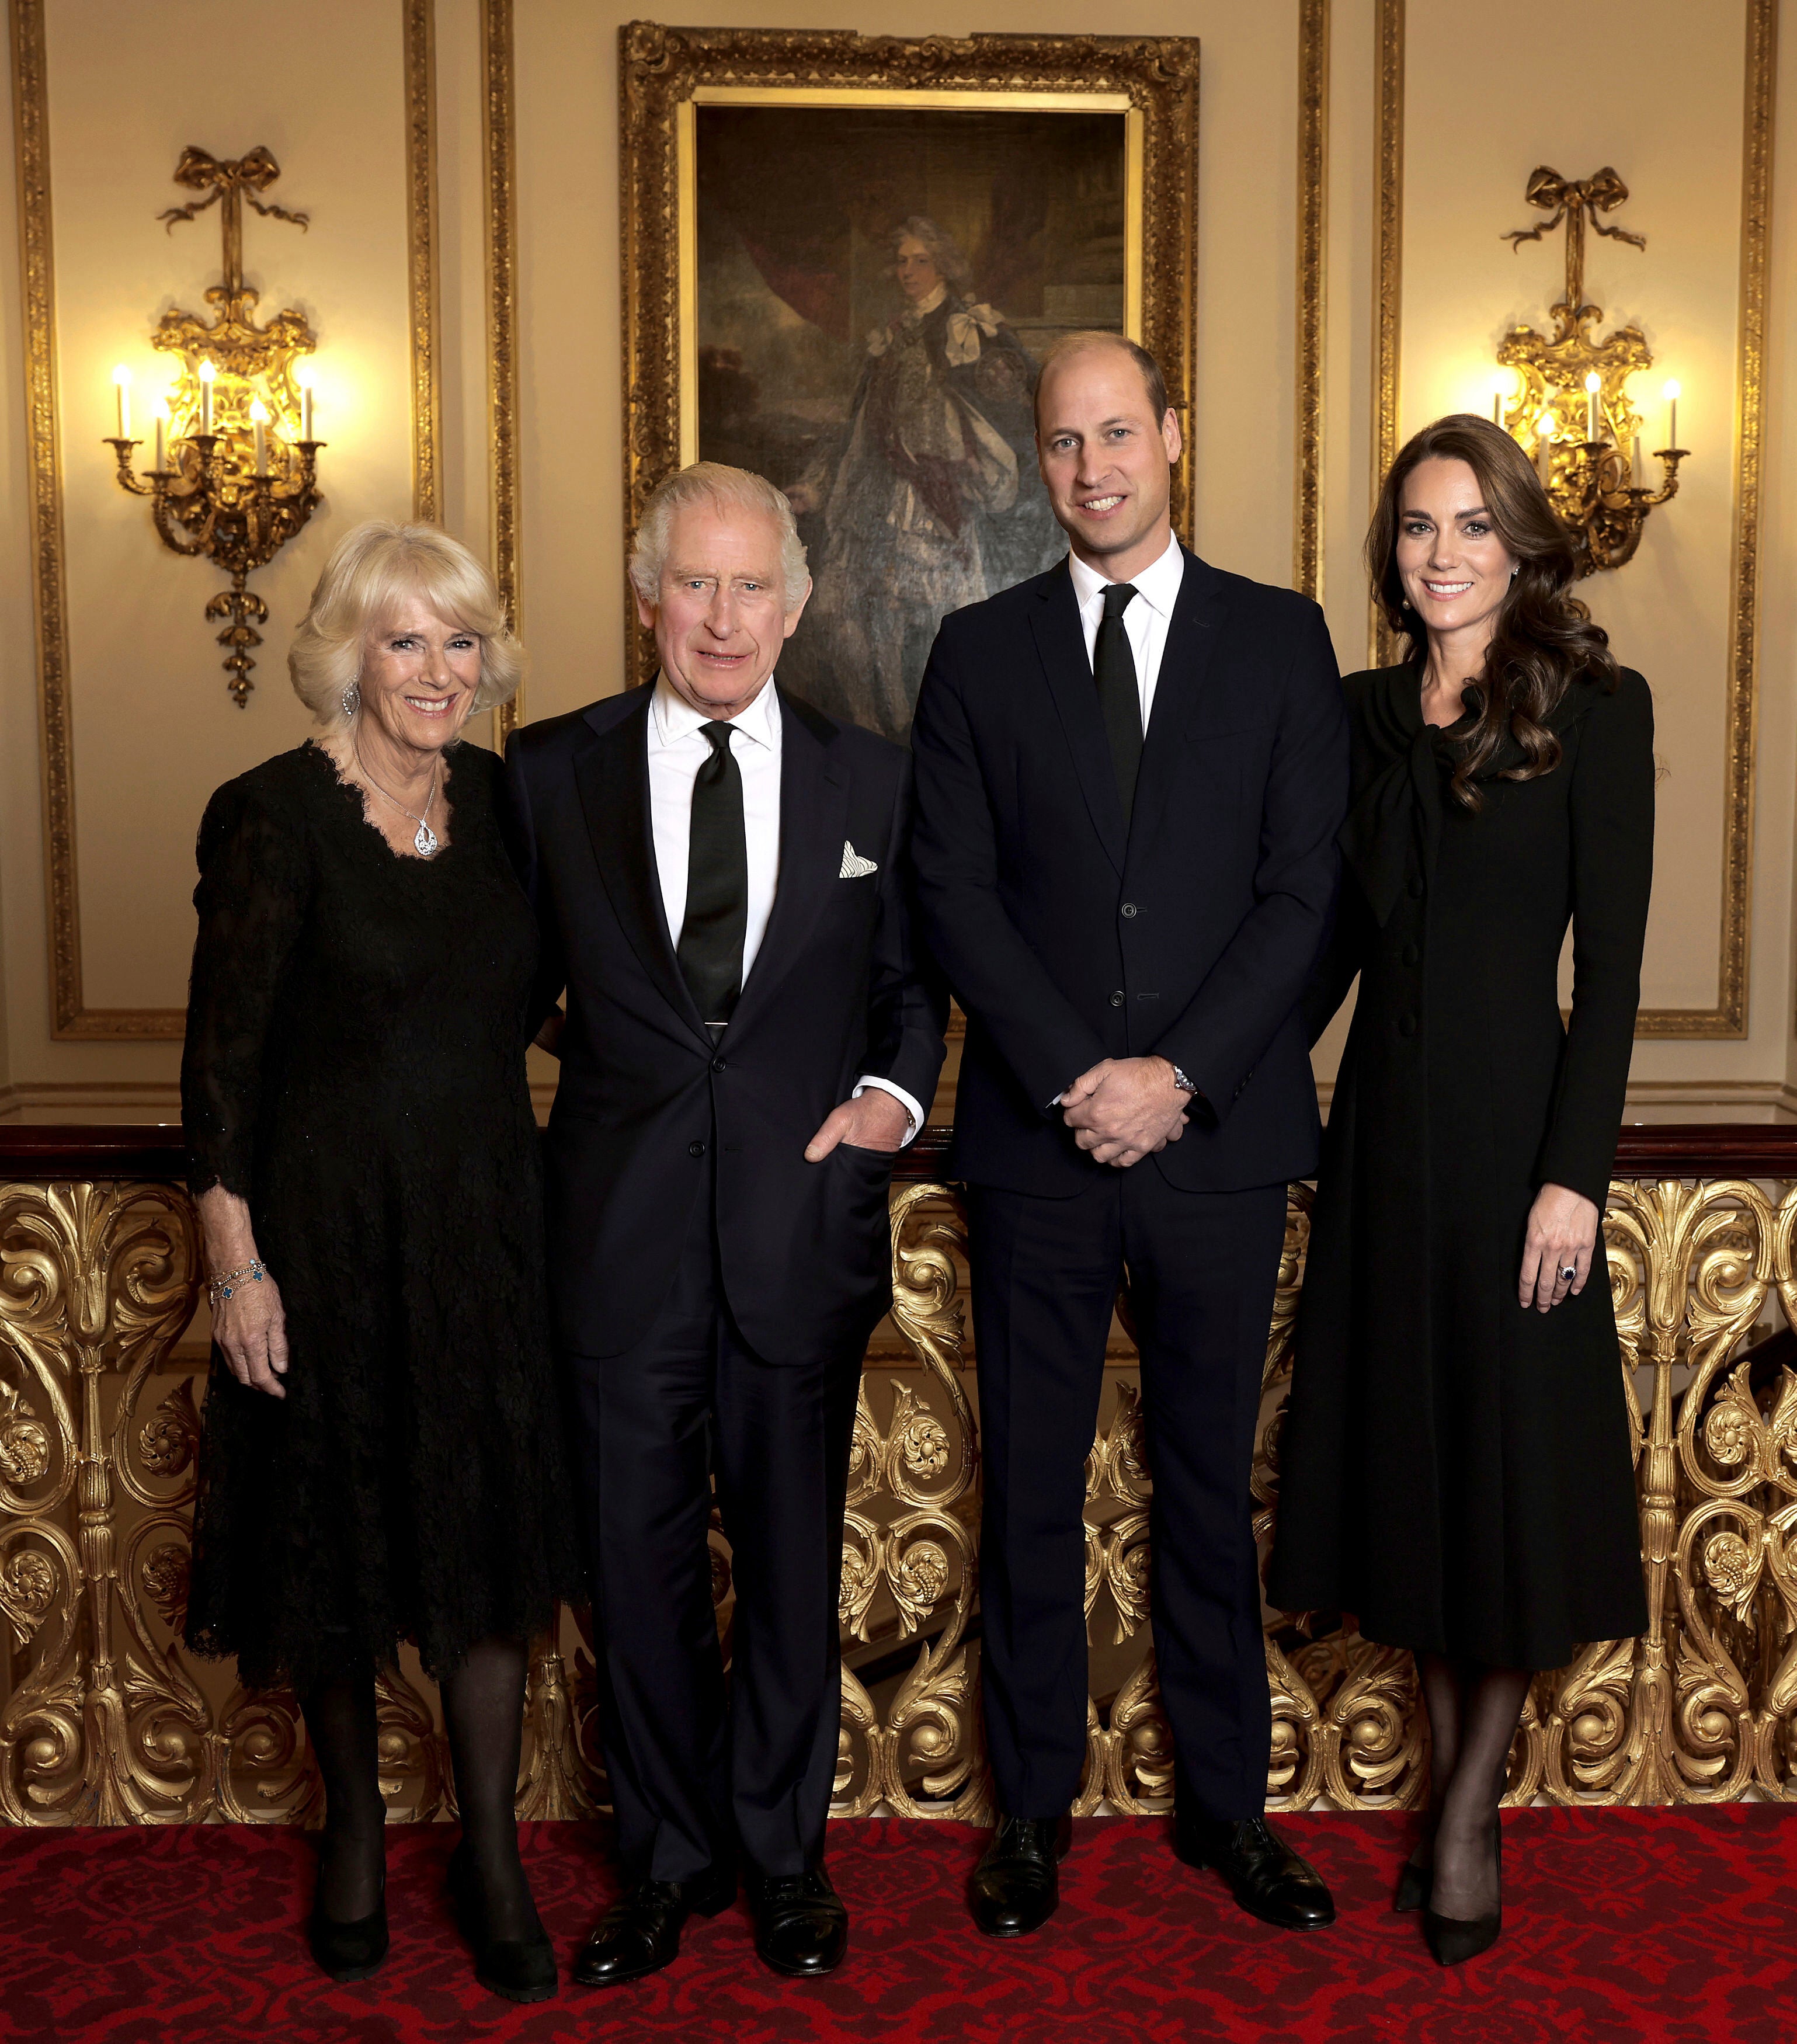 From left, Camilla, the Queen Consort, Britain's King Charles III, Prince William and Kate, Princess of Wales, pose at Buckingham Palace, London, ahead of the reception for Heads of State and Official Overseas Guests, on Sept. 18, 2022